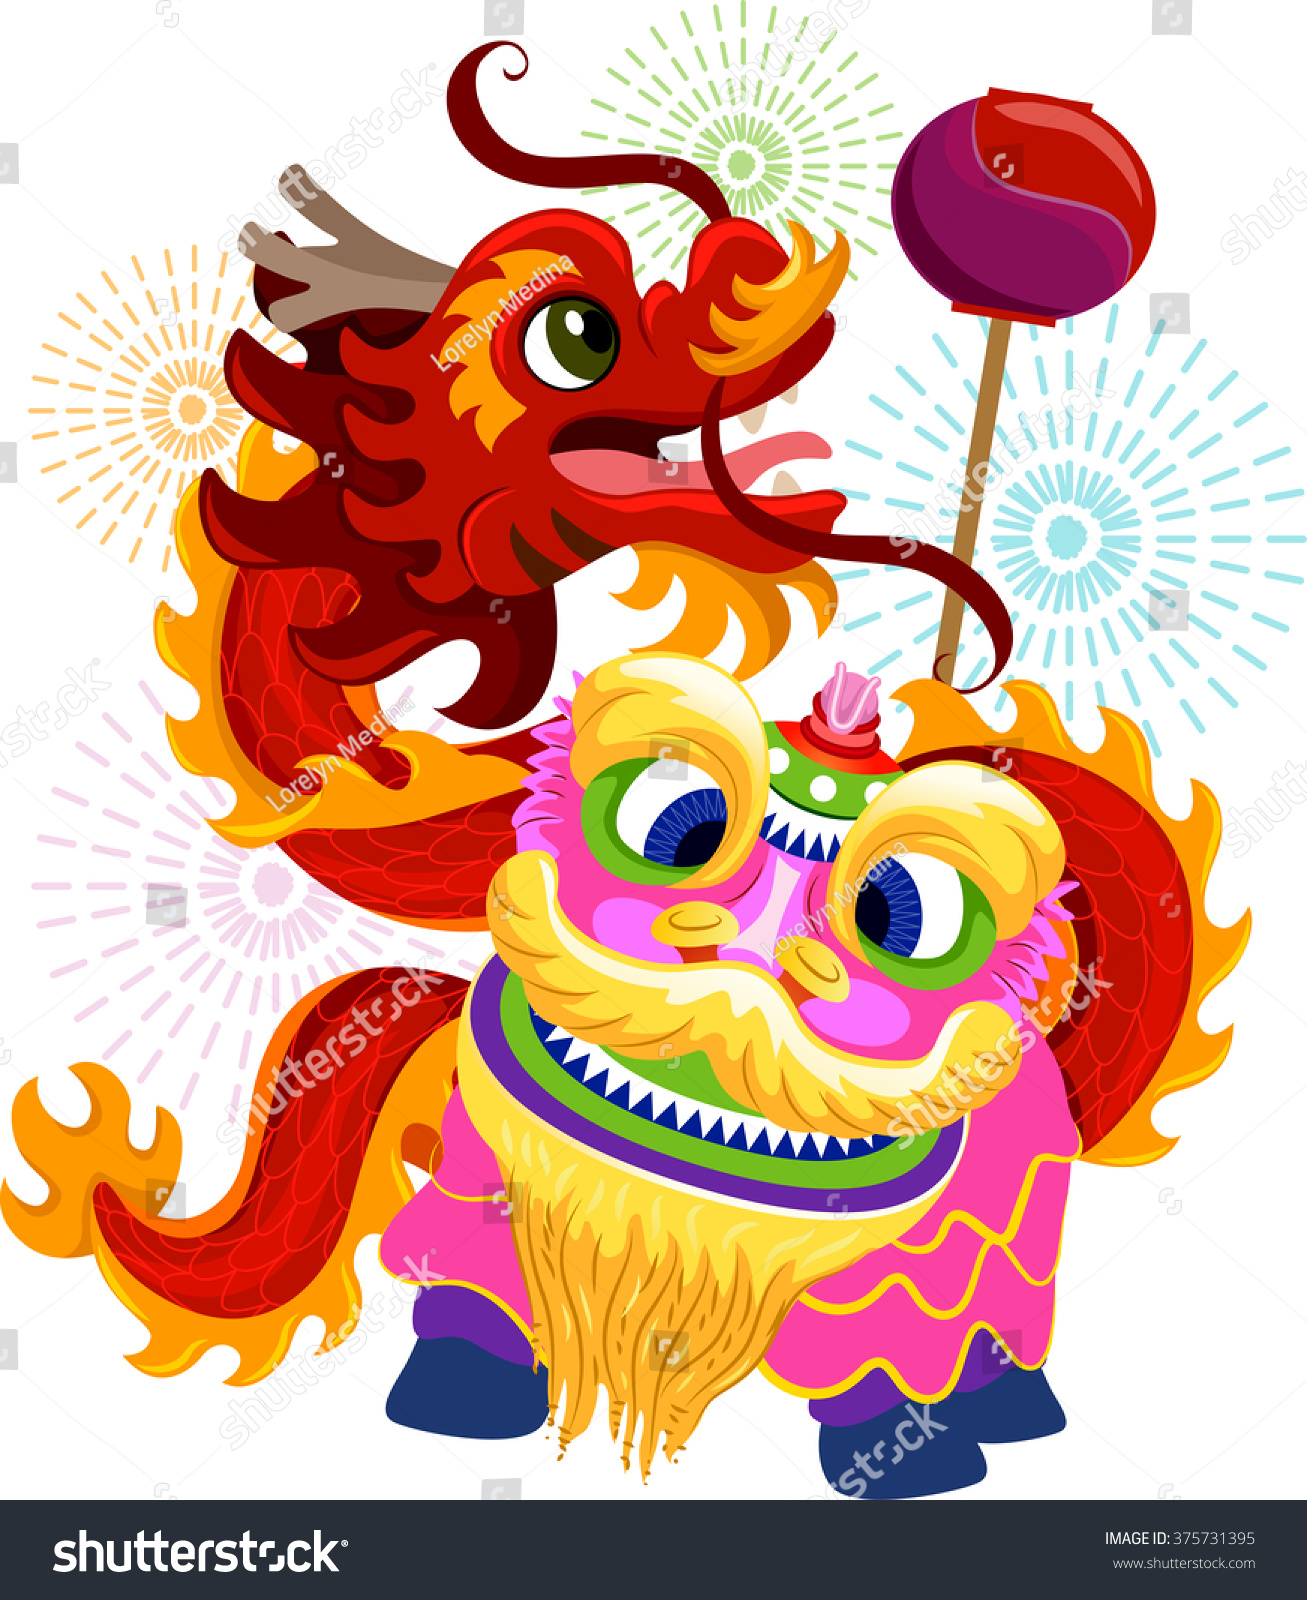 chinese new year clipart images - photo #47